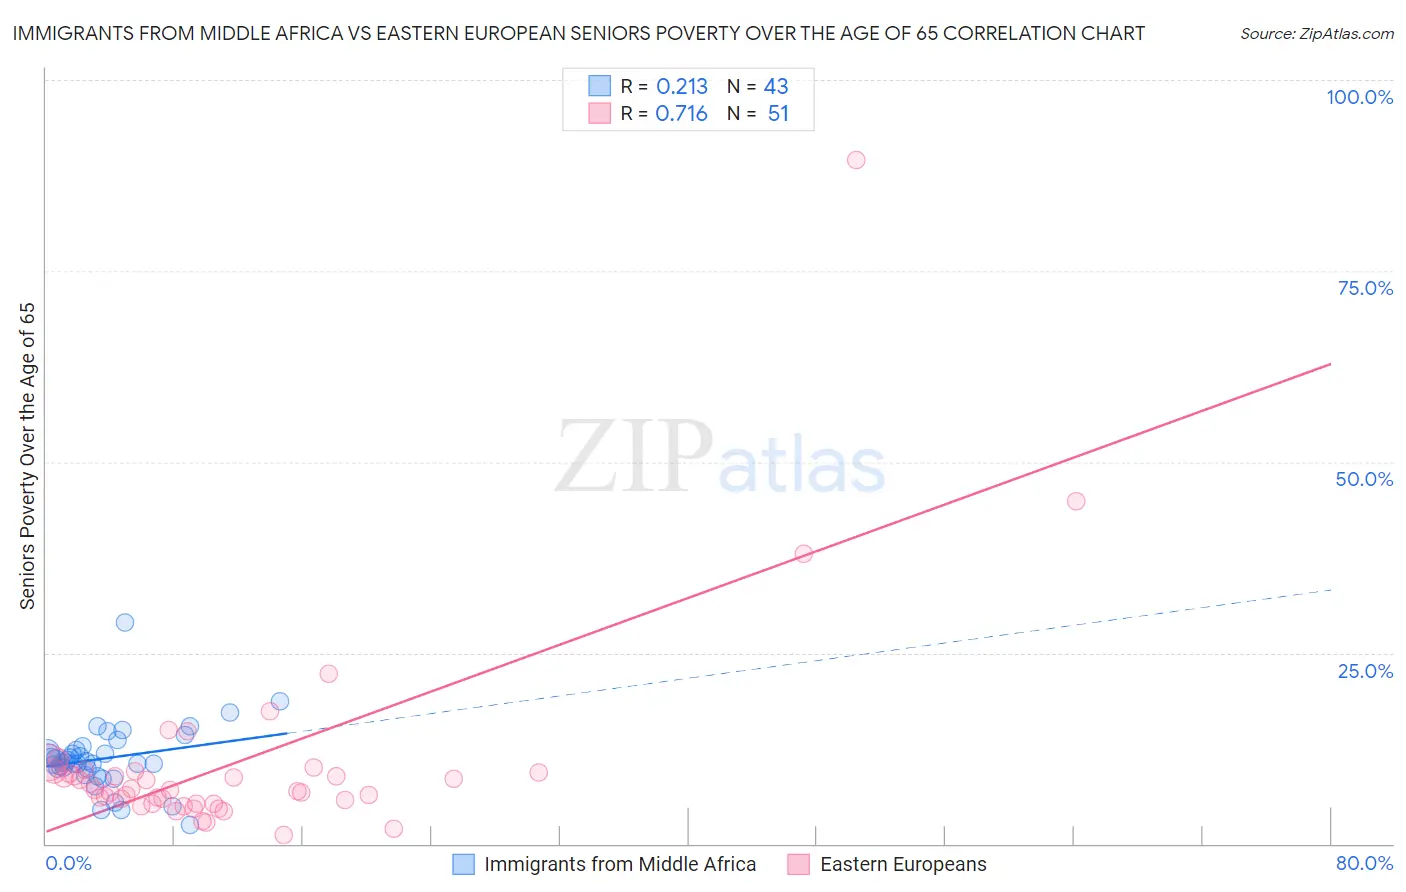 Immigrants from Middle Africa vs Eastern European Seniors Poverty Over the Age of 65